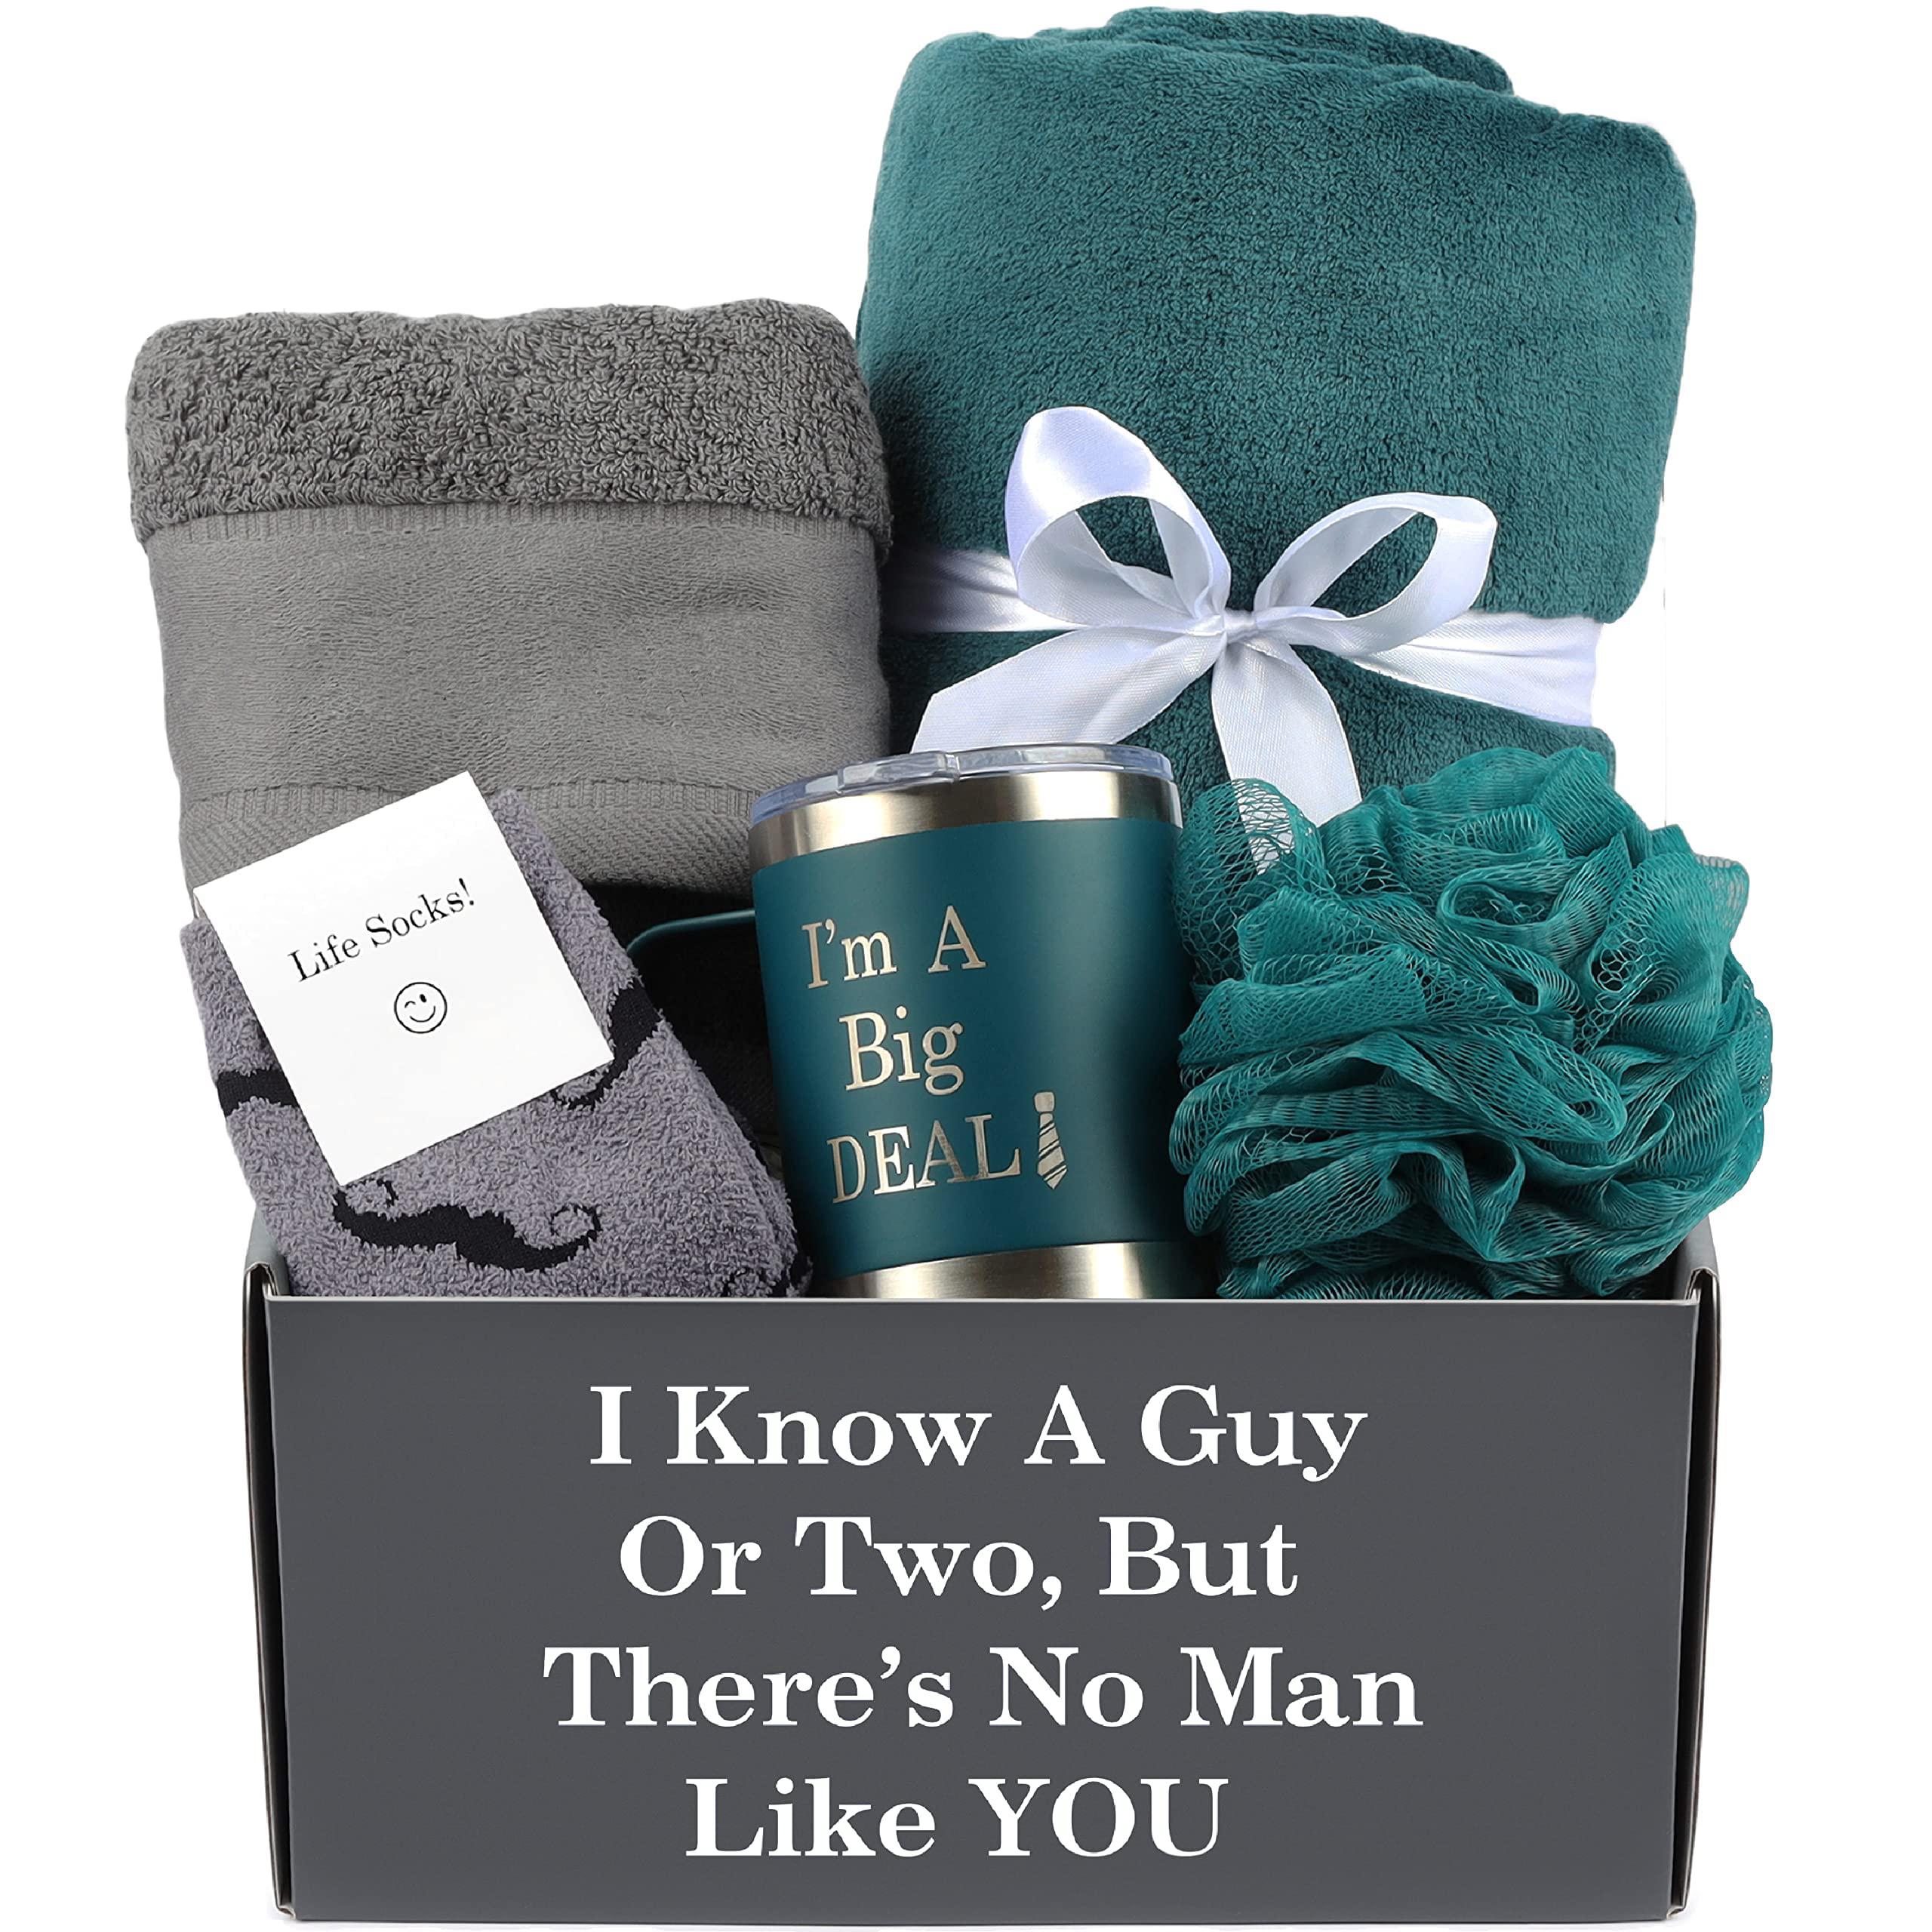 goldmus men gift set - unique gift box for men - outstanding birthday gifts for men, thoughtful gifts for dad, popular gifts 